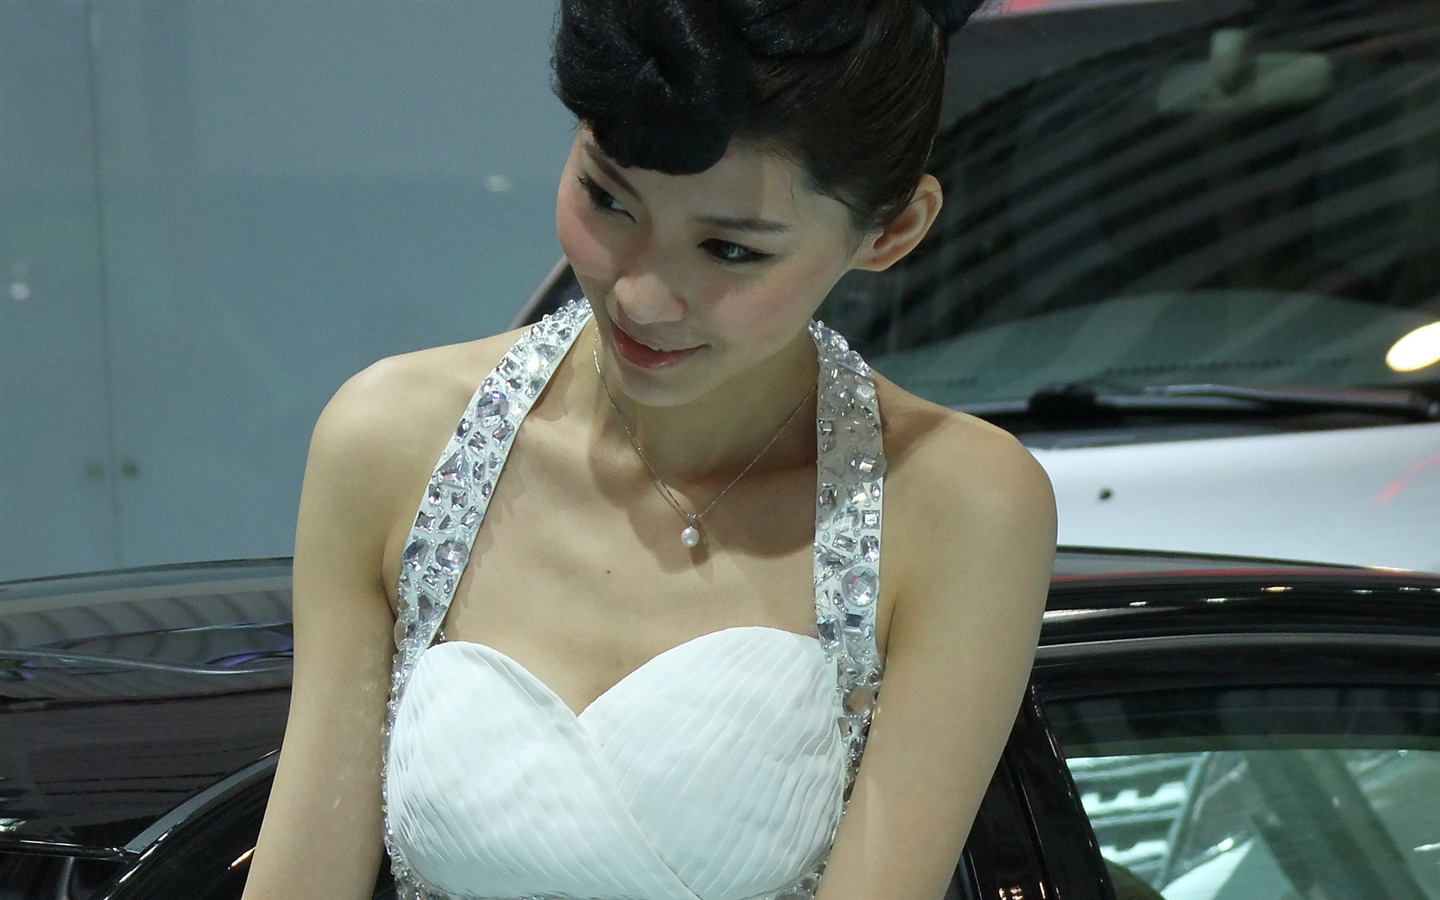 2010 Beijing Auto Show car models Collection (2) #1 - 1440x900